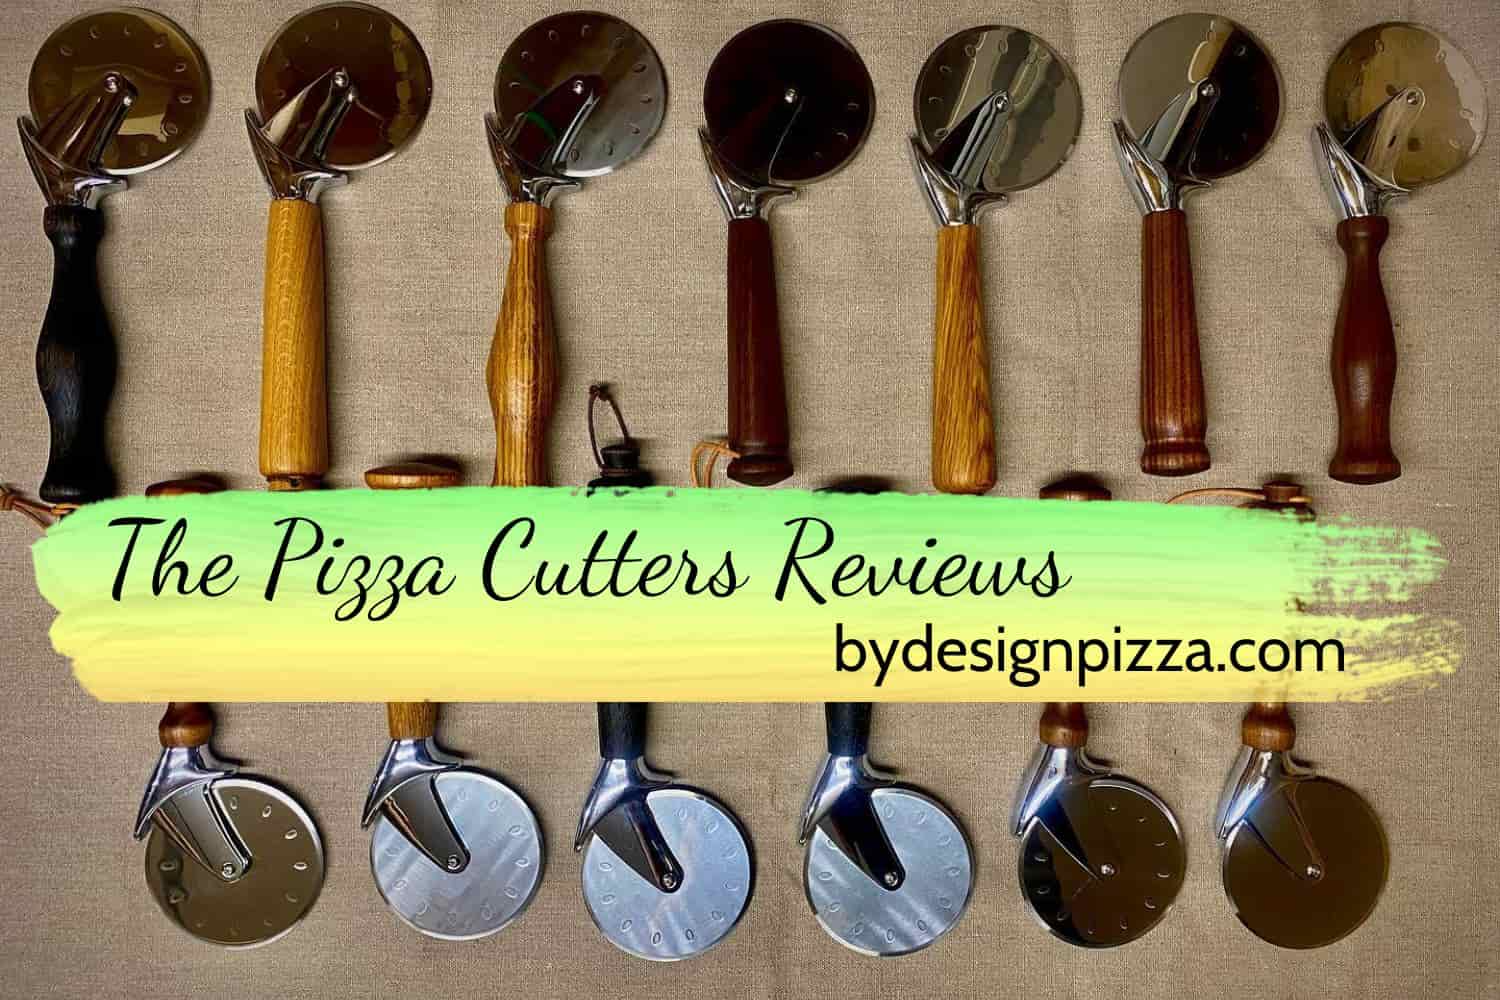 The Pizza Cutters Reviews